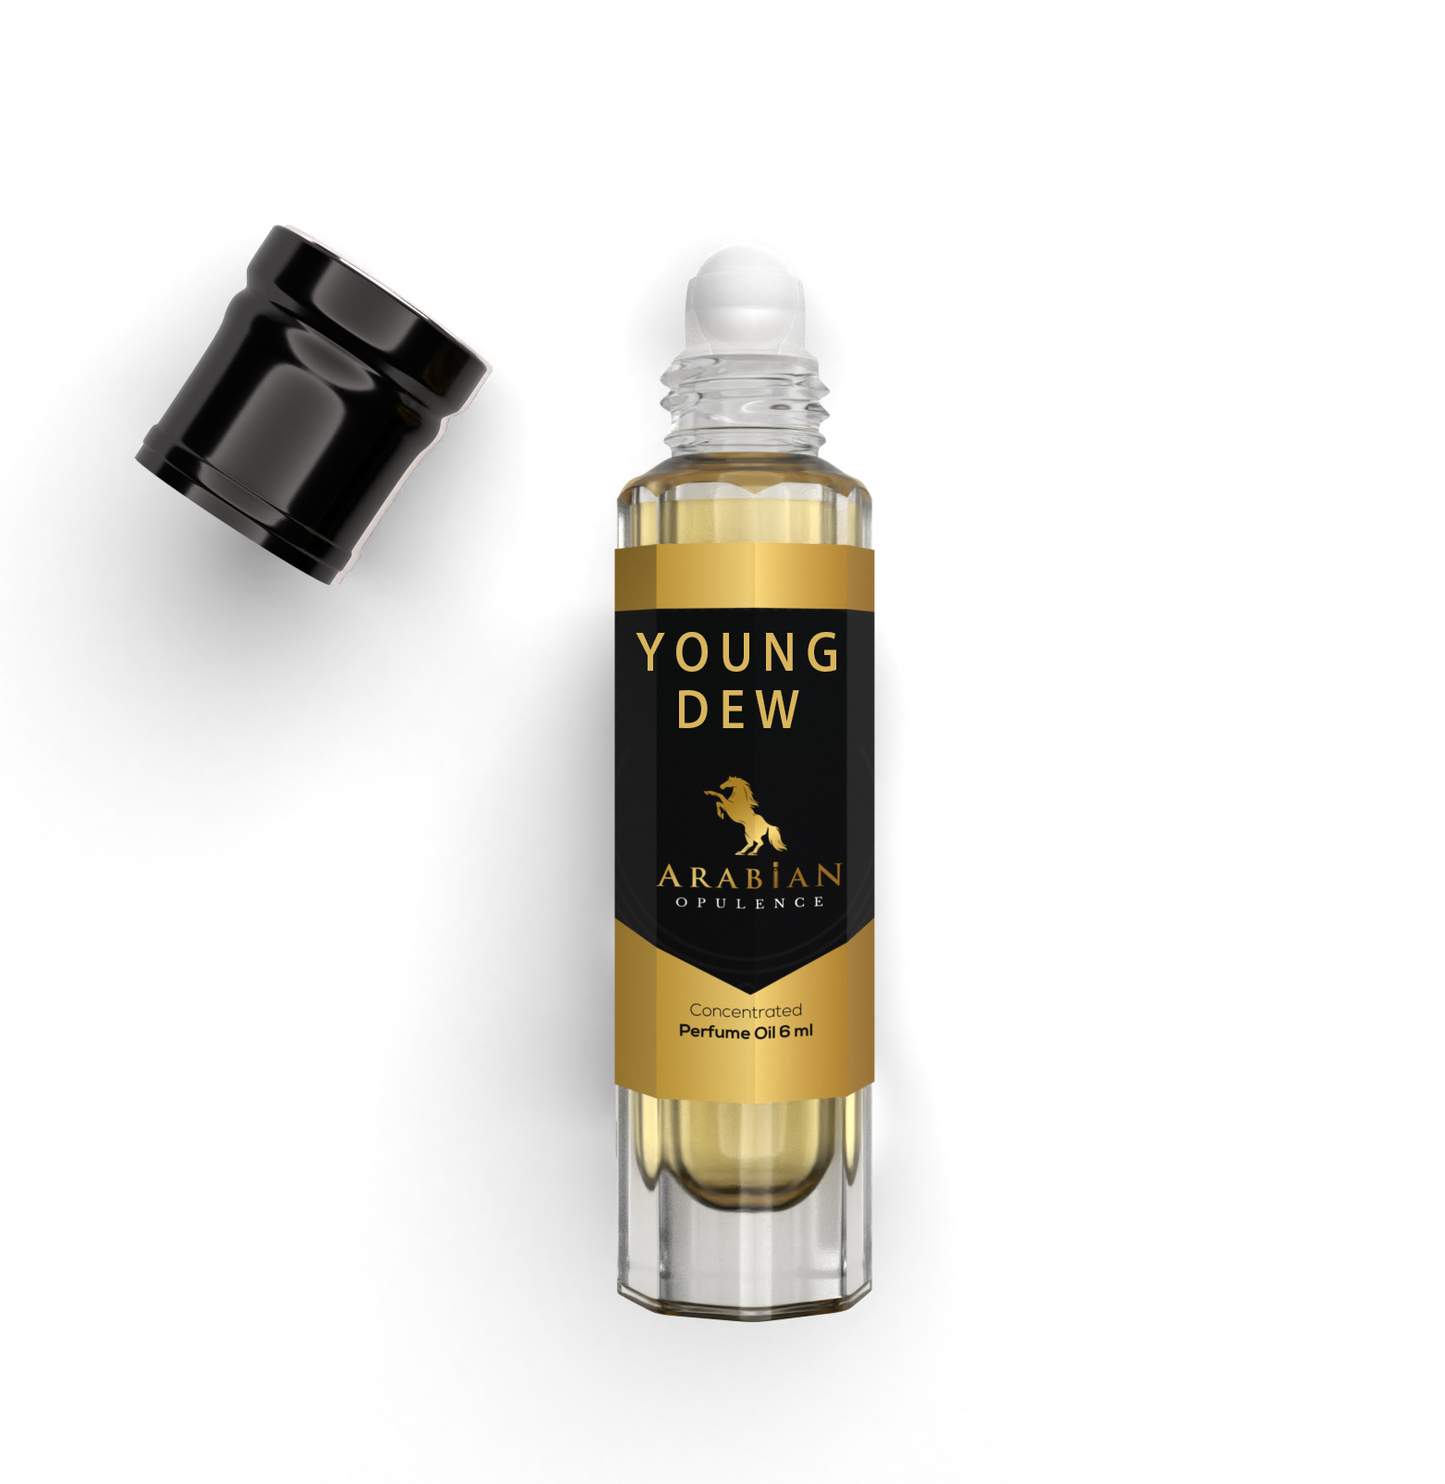 FR305 YOUNG DEW W - Perfume Body Oil - Alcohol Free